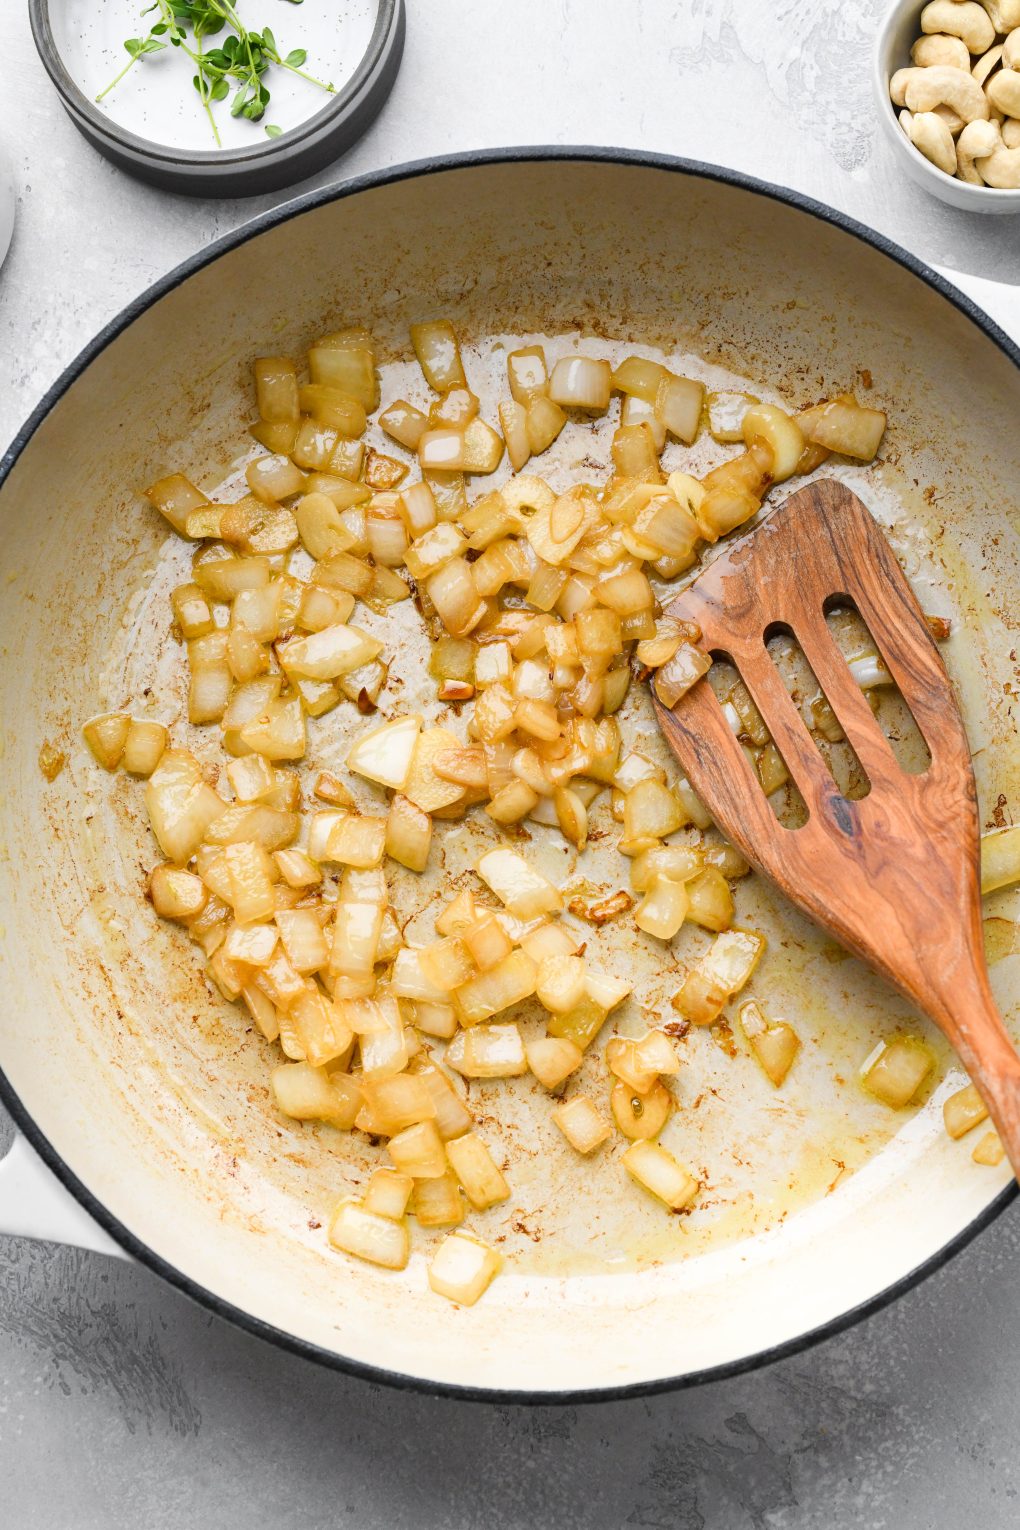 Photos showing how to make Whole30 gravy - diced onions caramelizing in a skillet.